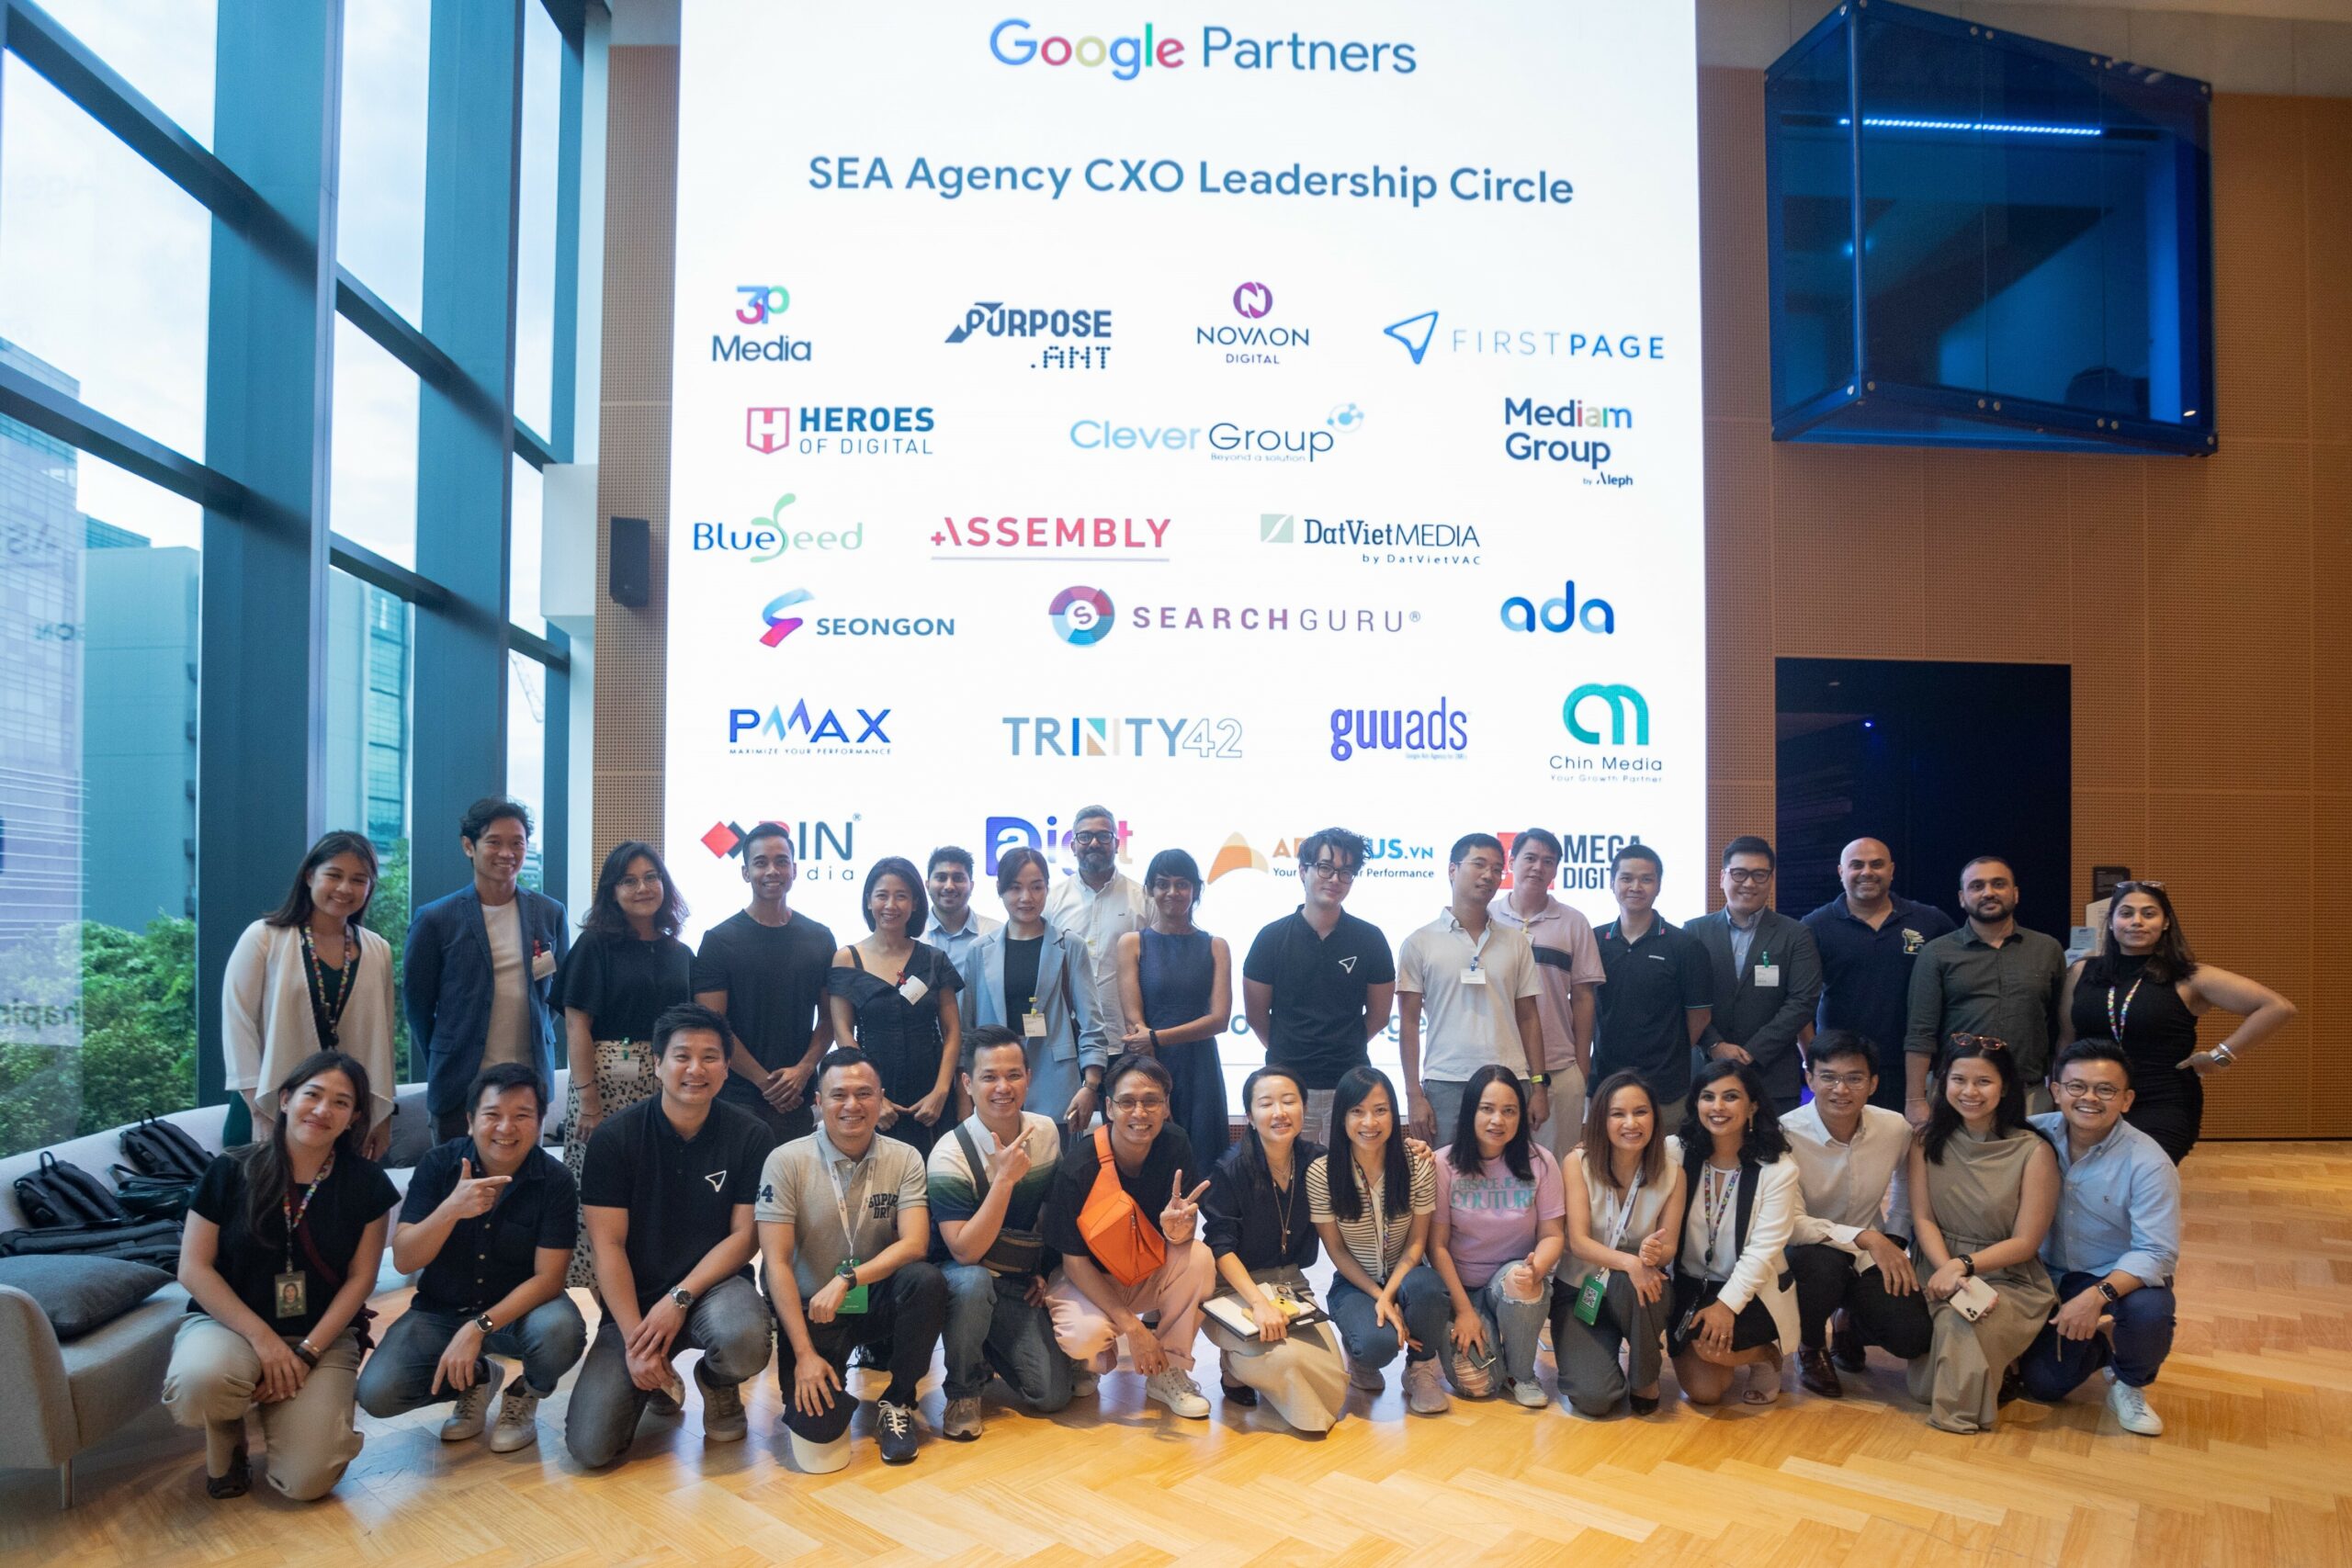 The Digital Beat Goes On: Key Insights From Google’s SEA CXO Event